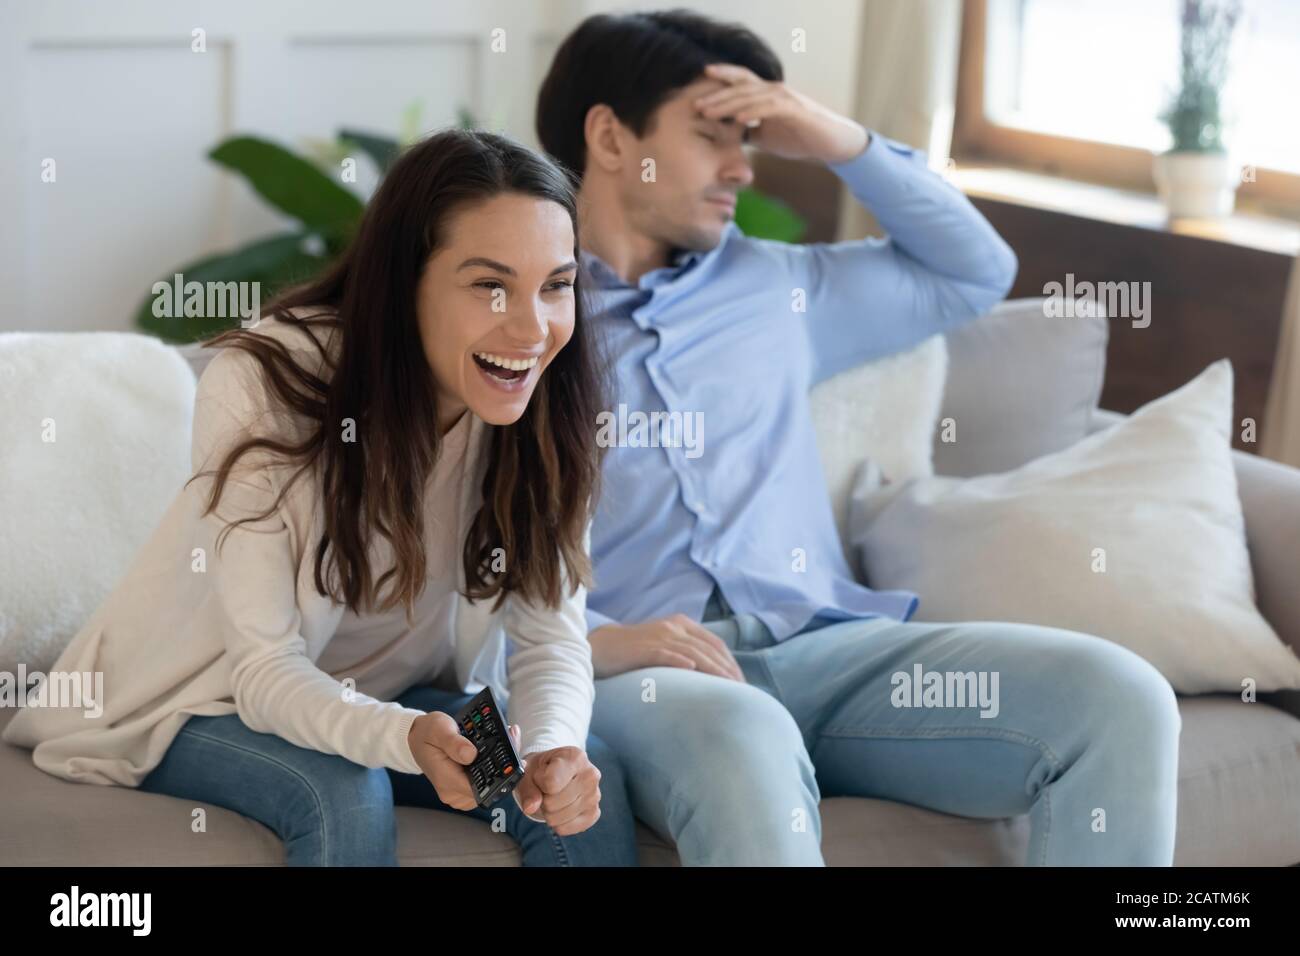 Couple disagree on channel choice or tv program. Stock Photo